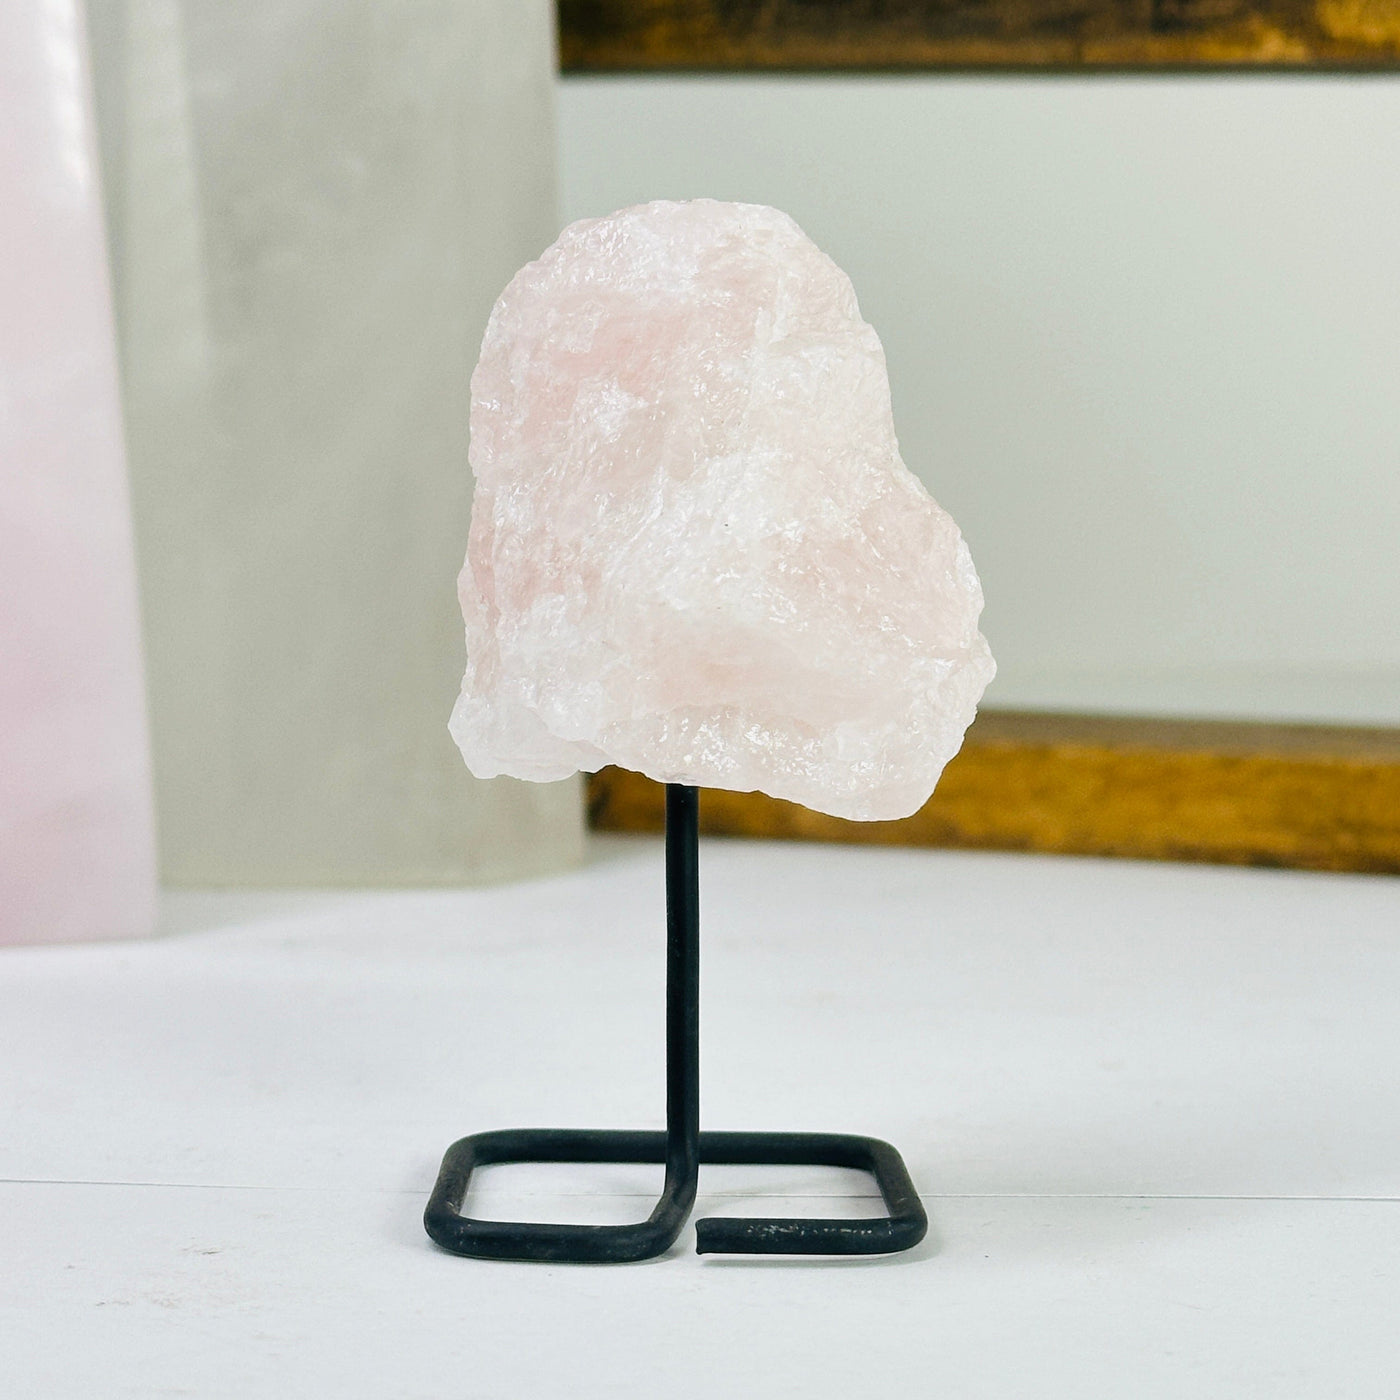 Rose quartz on metal stand with decorations in the background